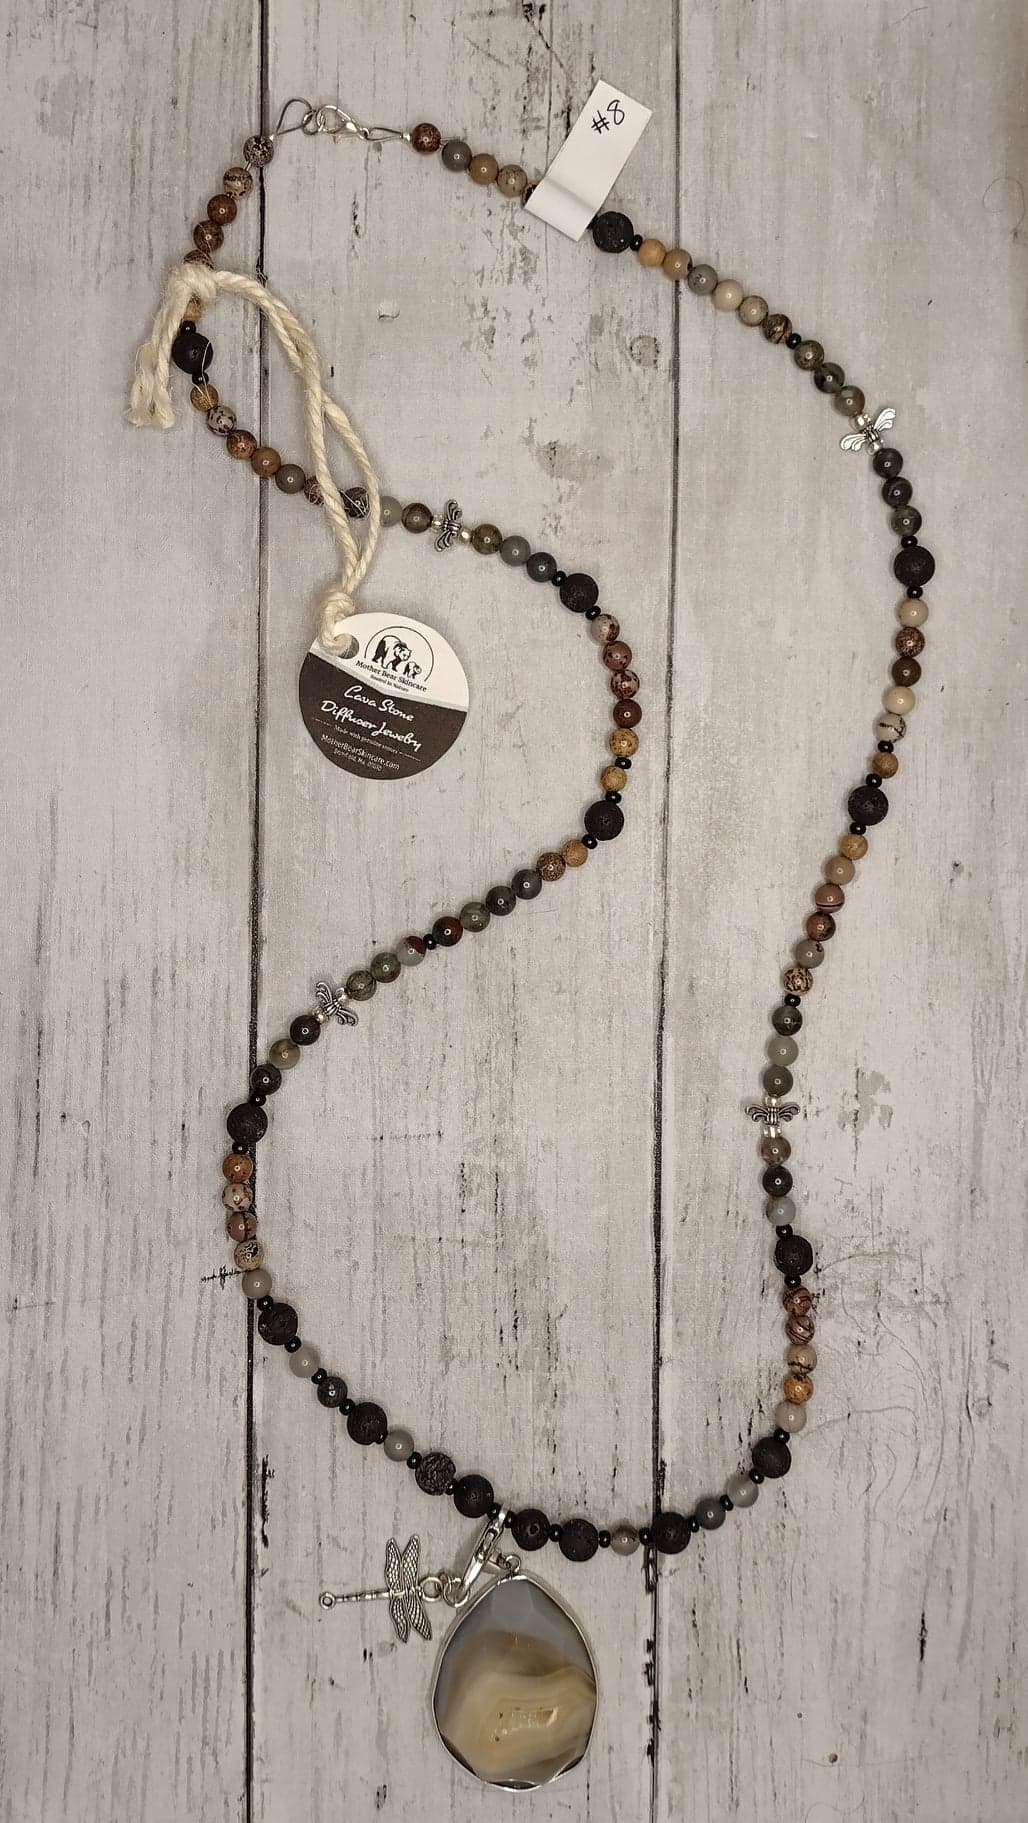 Handmade Lava Stone Necklace made with Naturally Sourced Lava Stones to Promote Emotional & Spiritual Healing~Apparel & Accessories~Jewelry~Necklaces